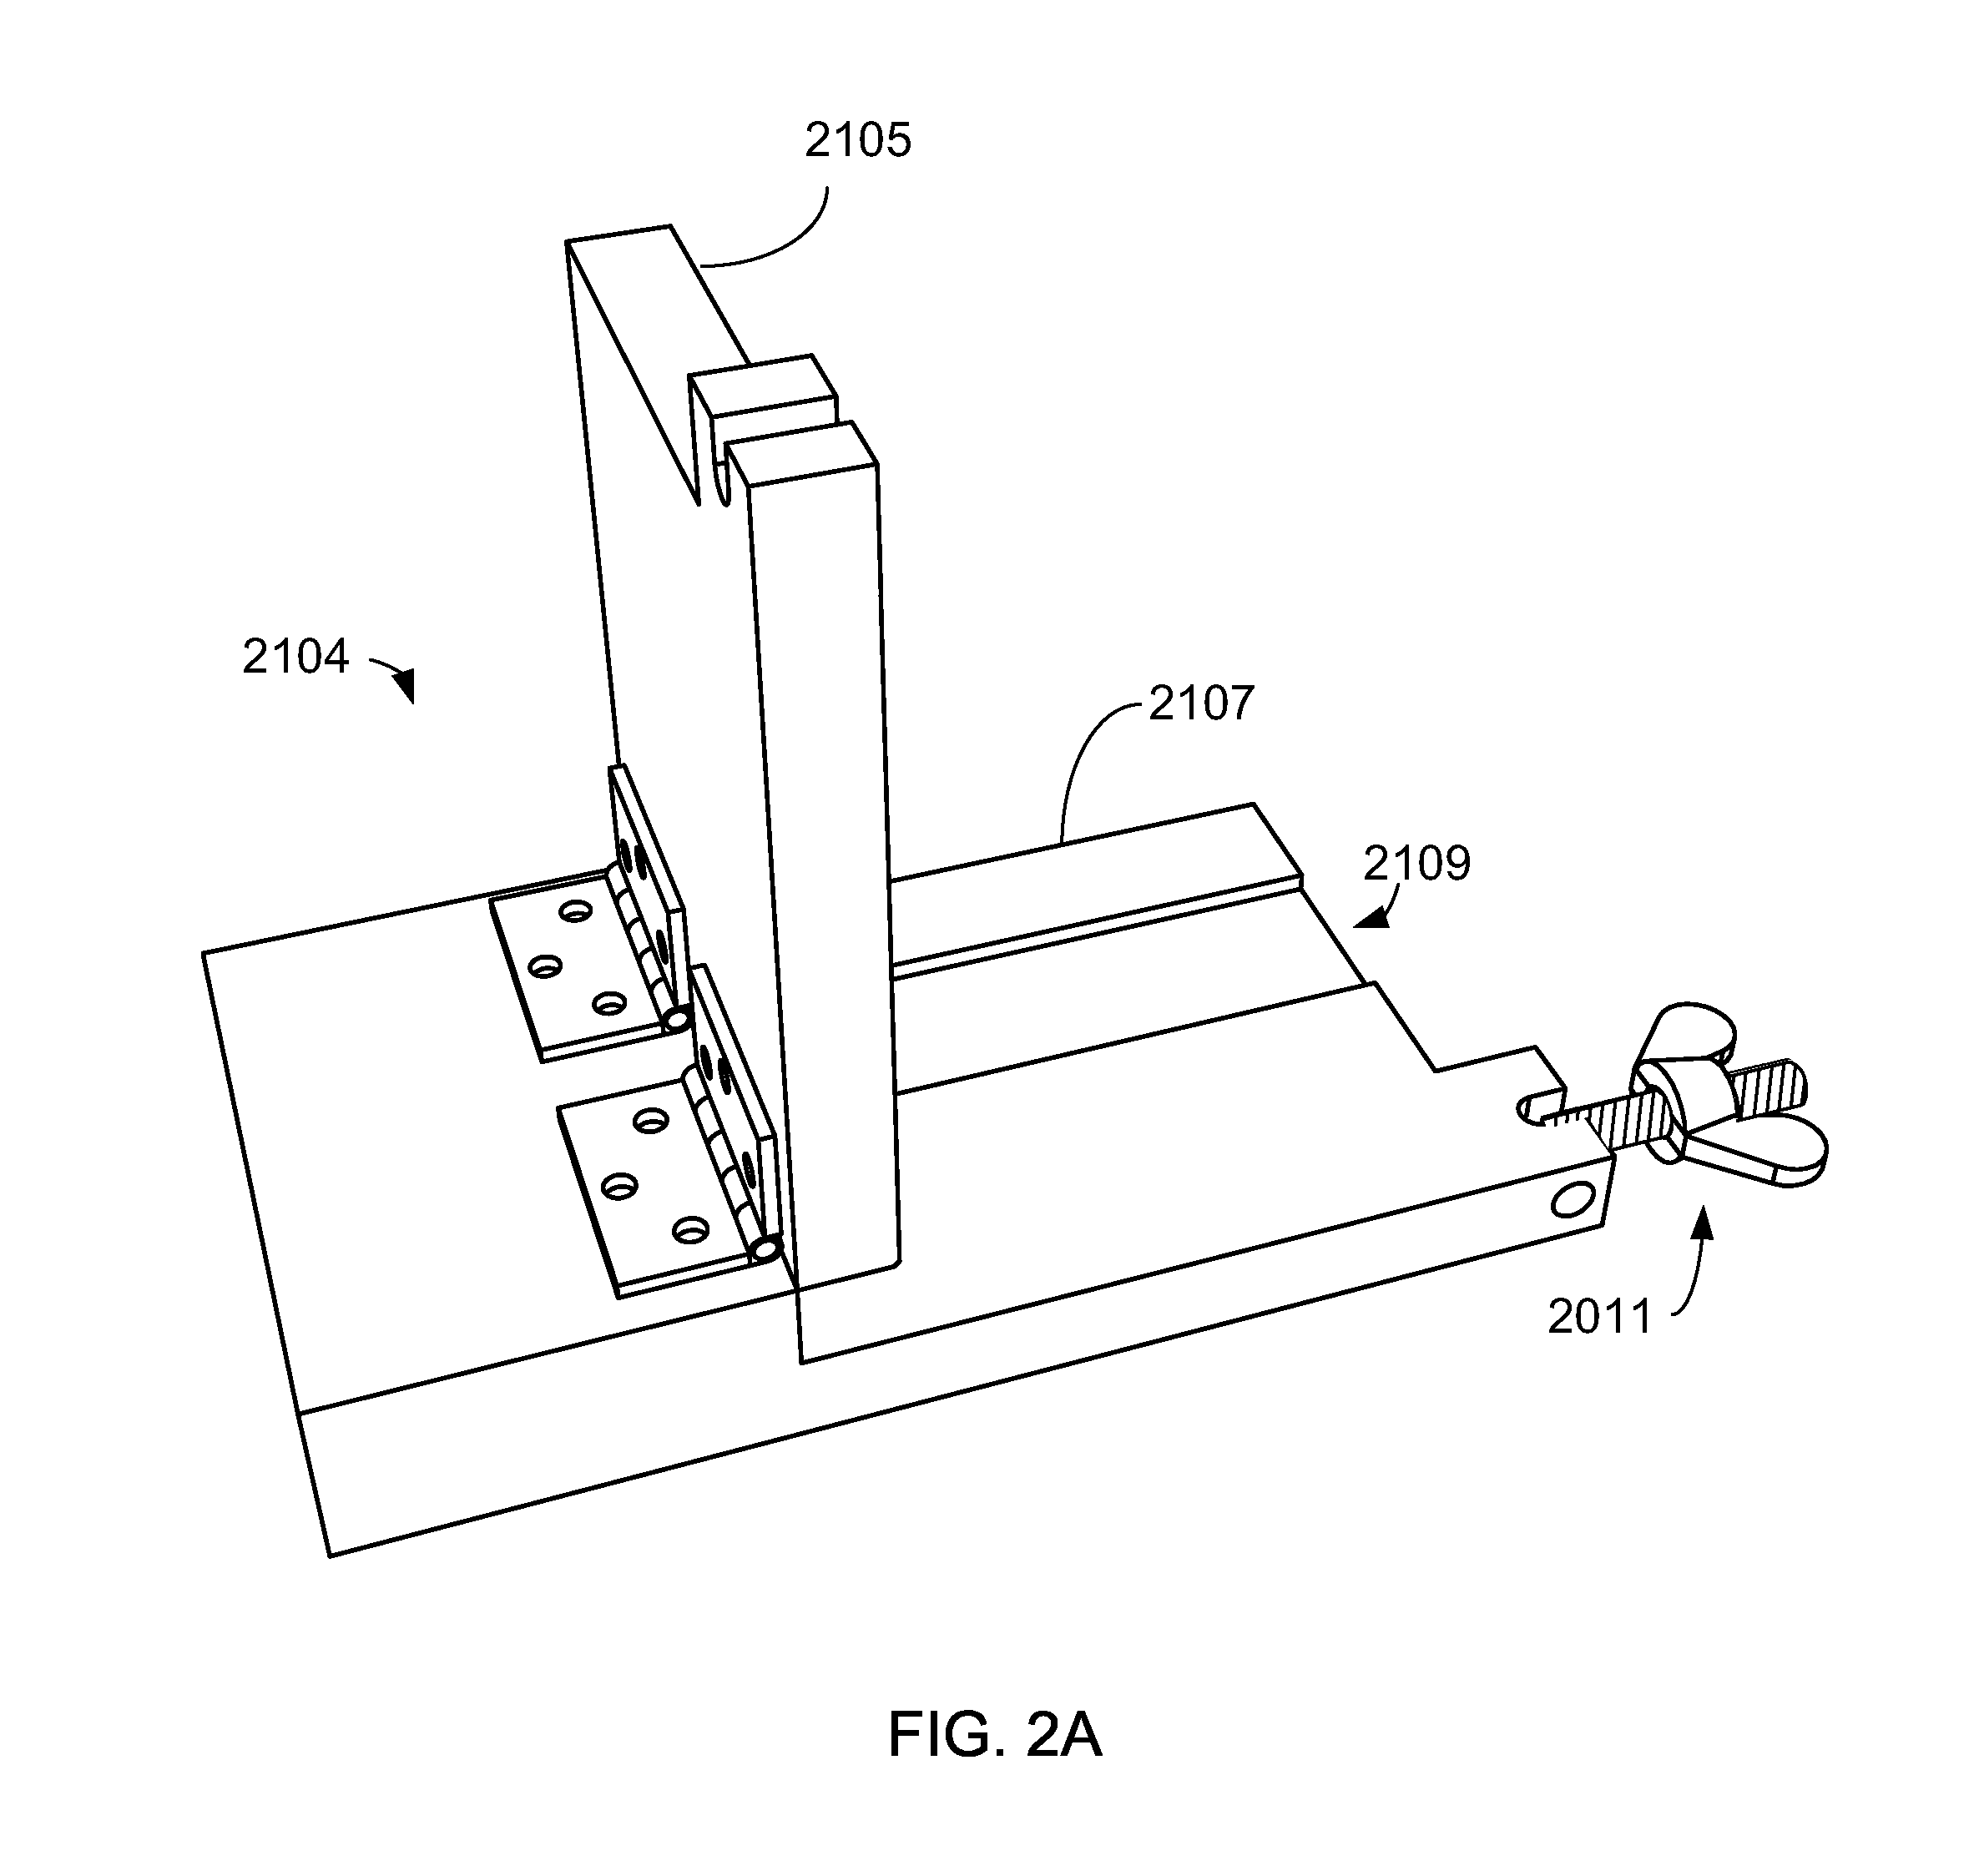 Apparatus and method for breakage testing of small articles